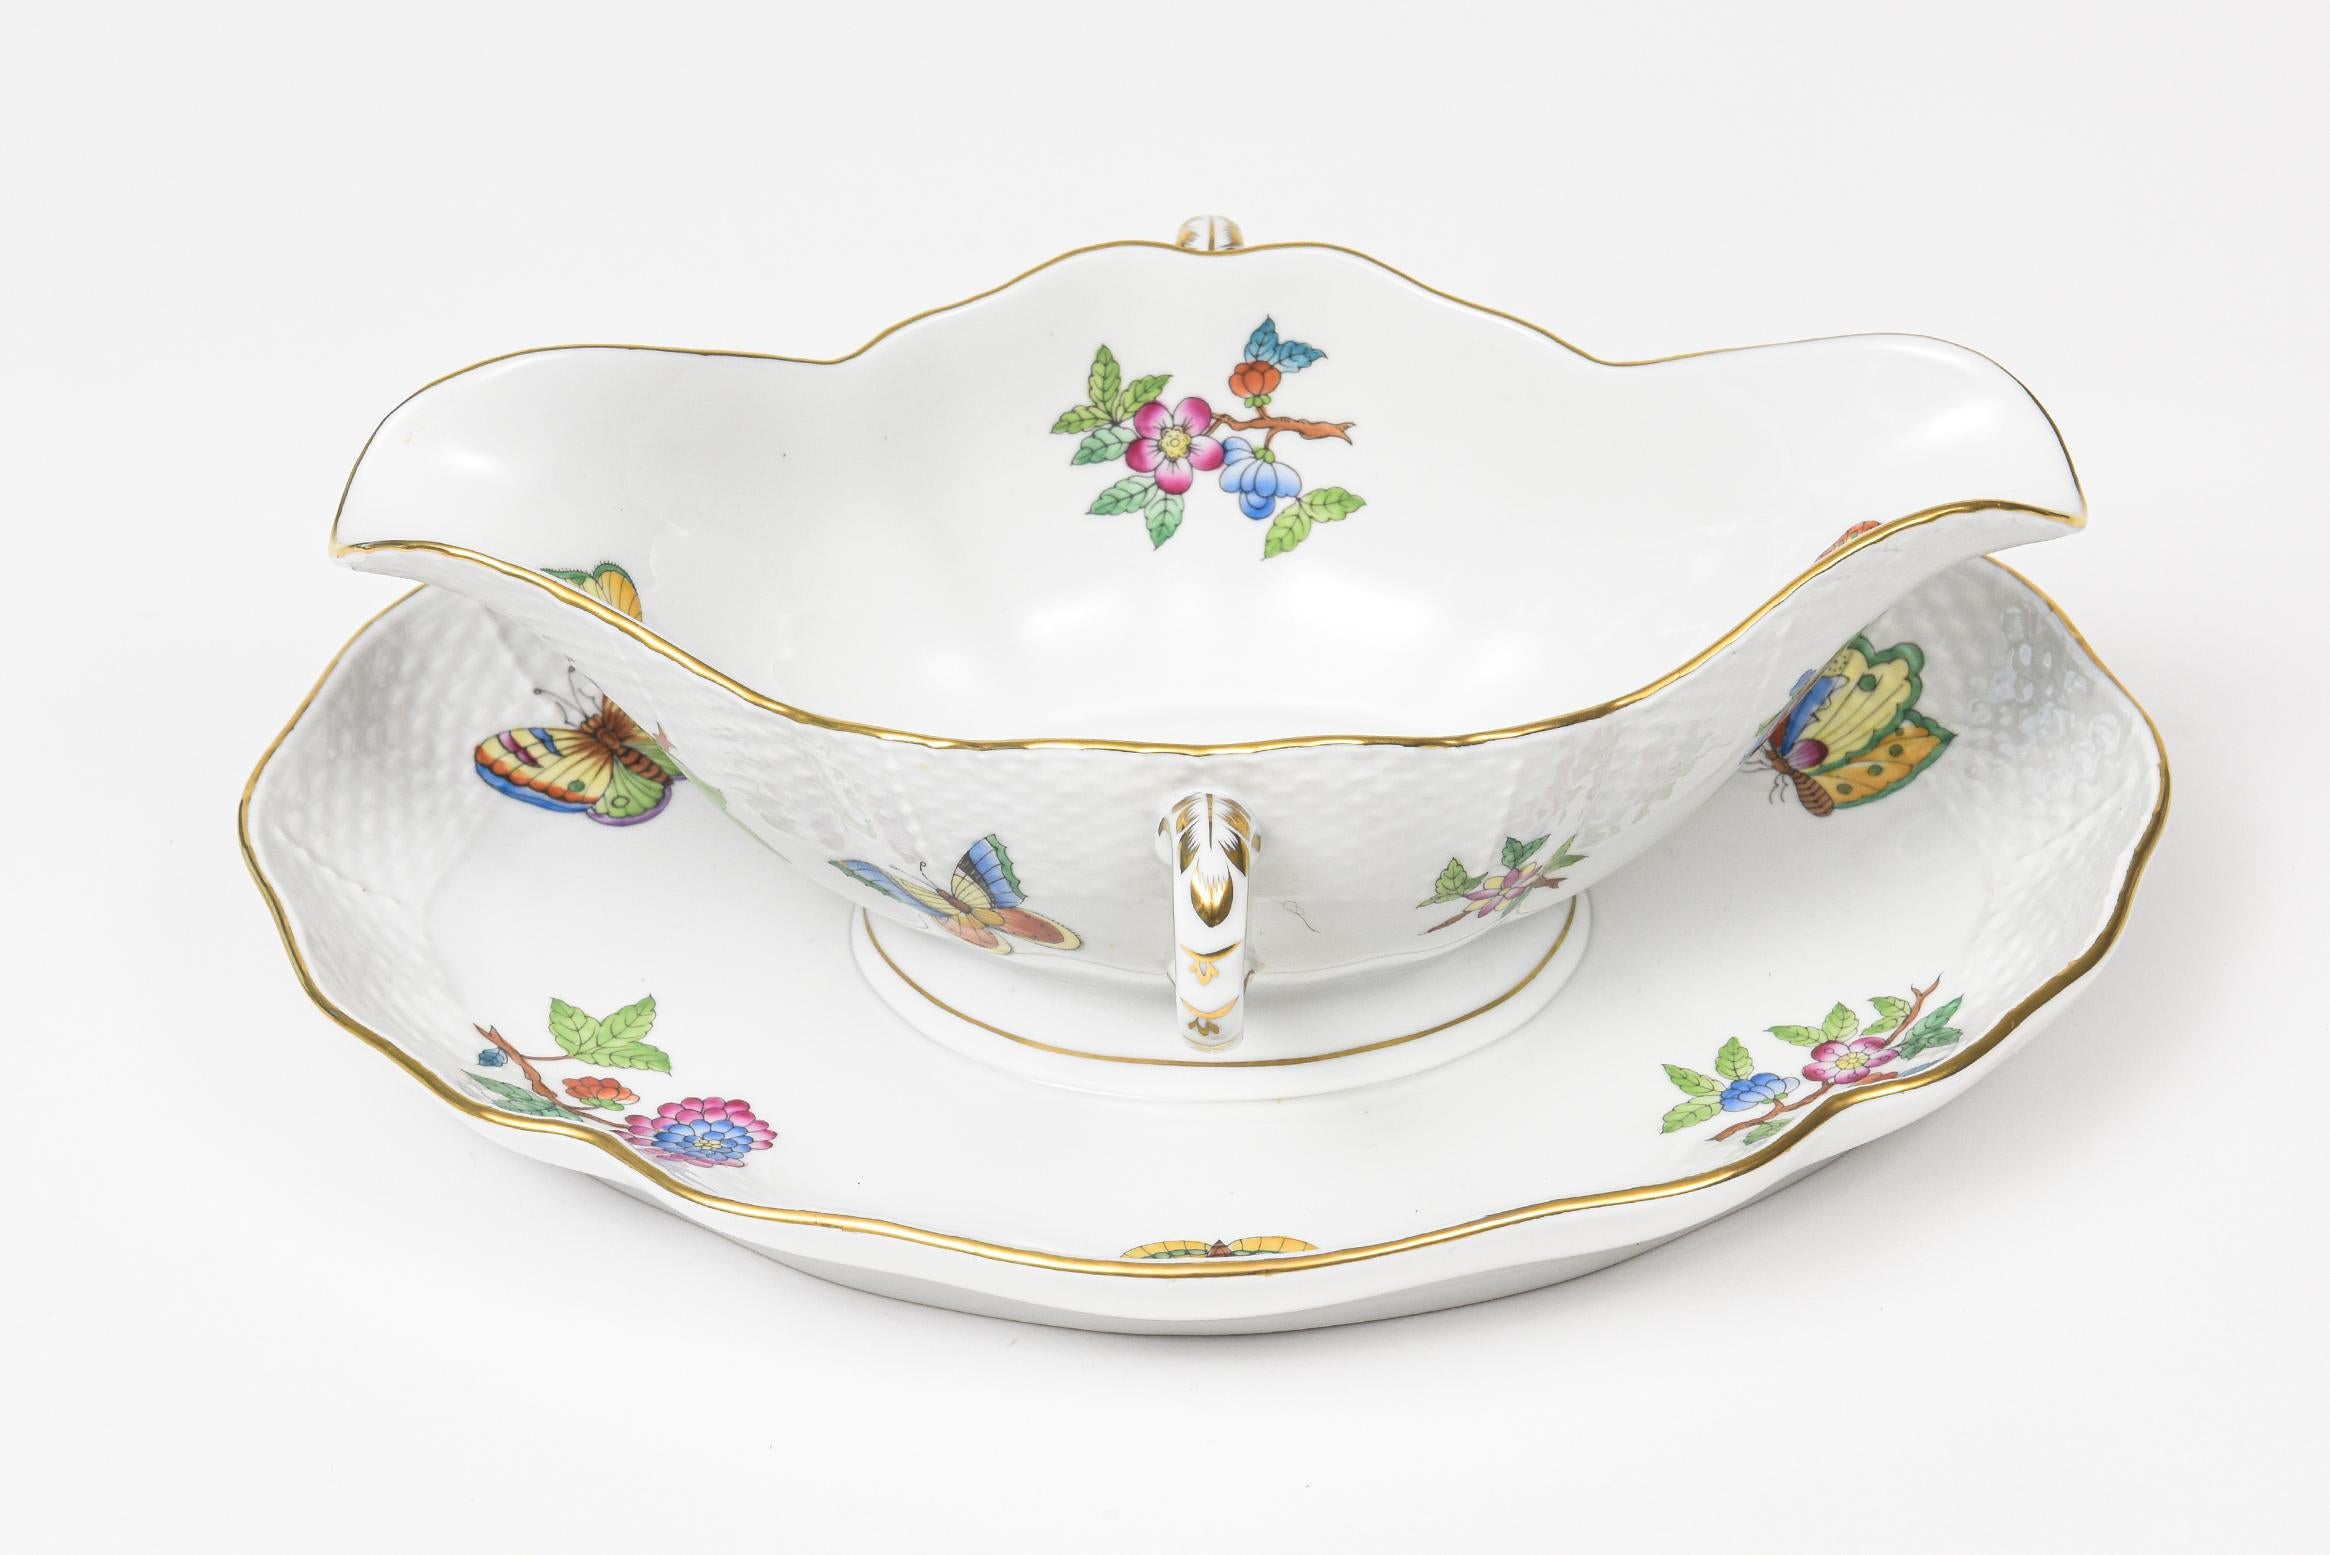 Elegant Herend China sauce gravy boat with attached underplate. This is the older pattern of Queen Victoria that does not have the green border. It has a weave rim and a gold edge. The pattern features flowers and butterflies.